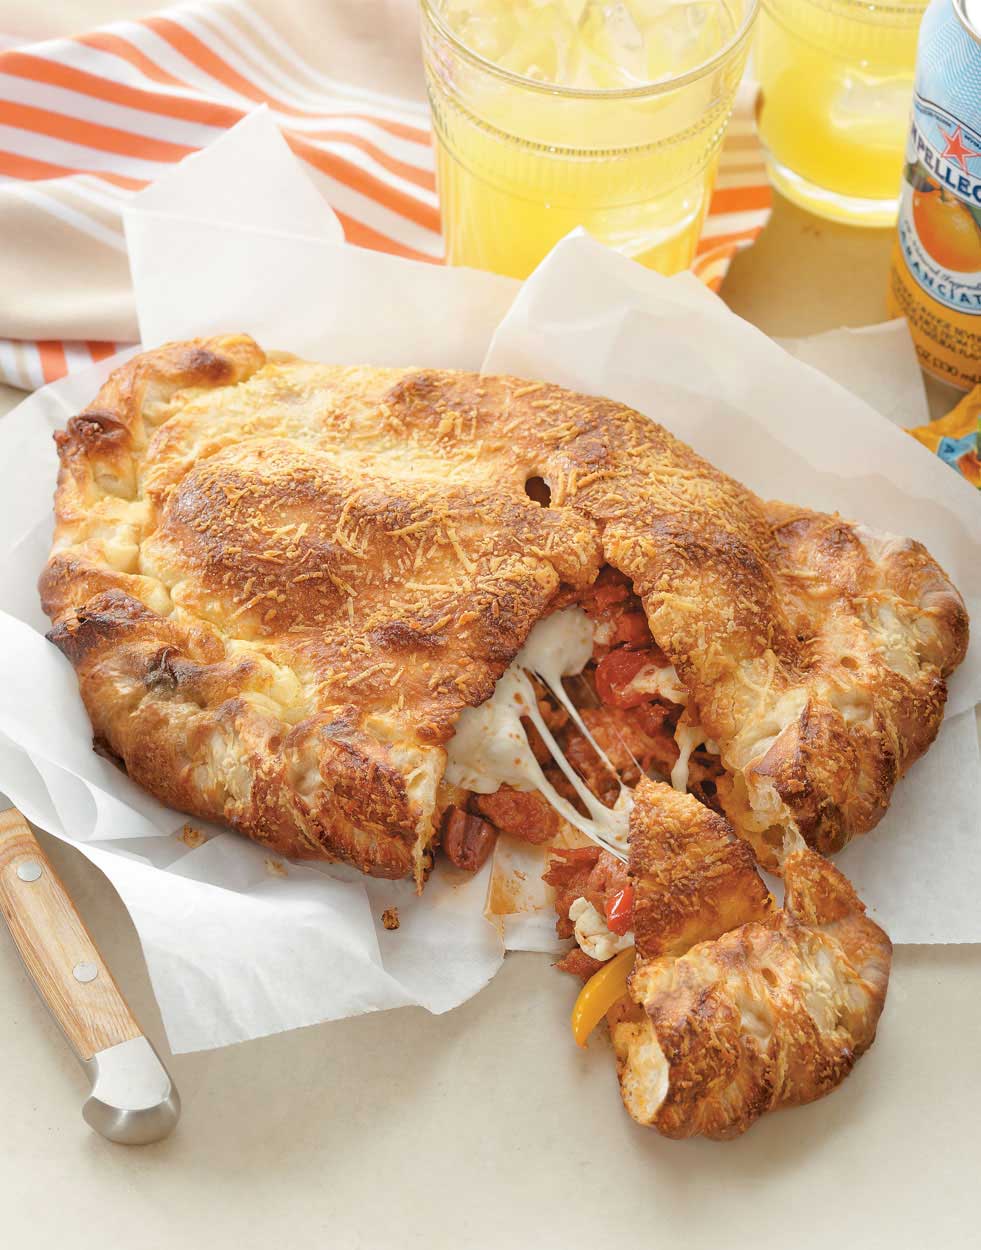 Calzone Style pizza